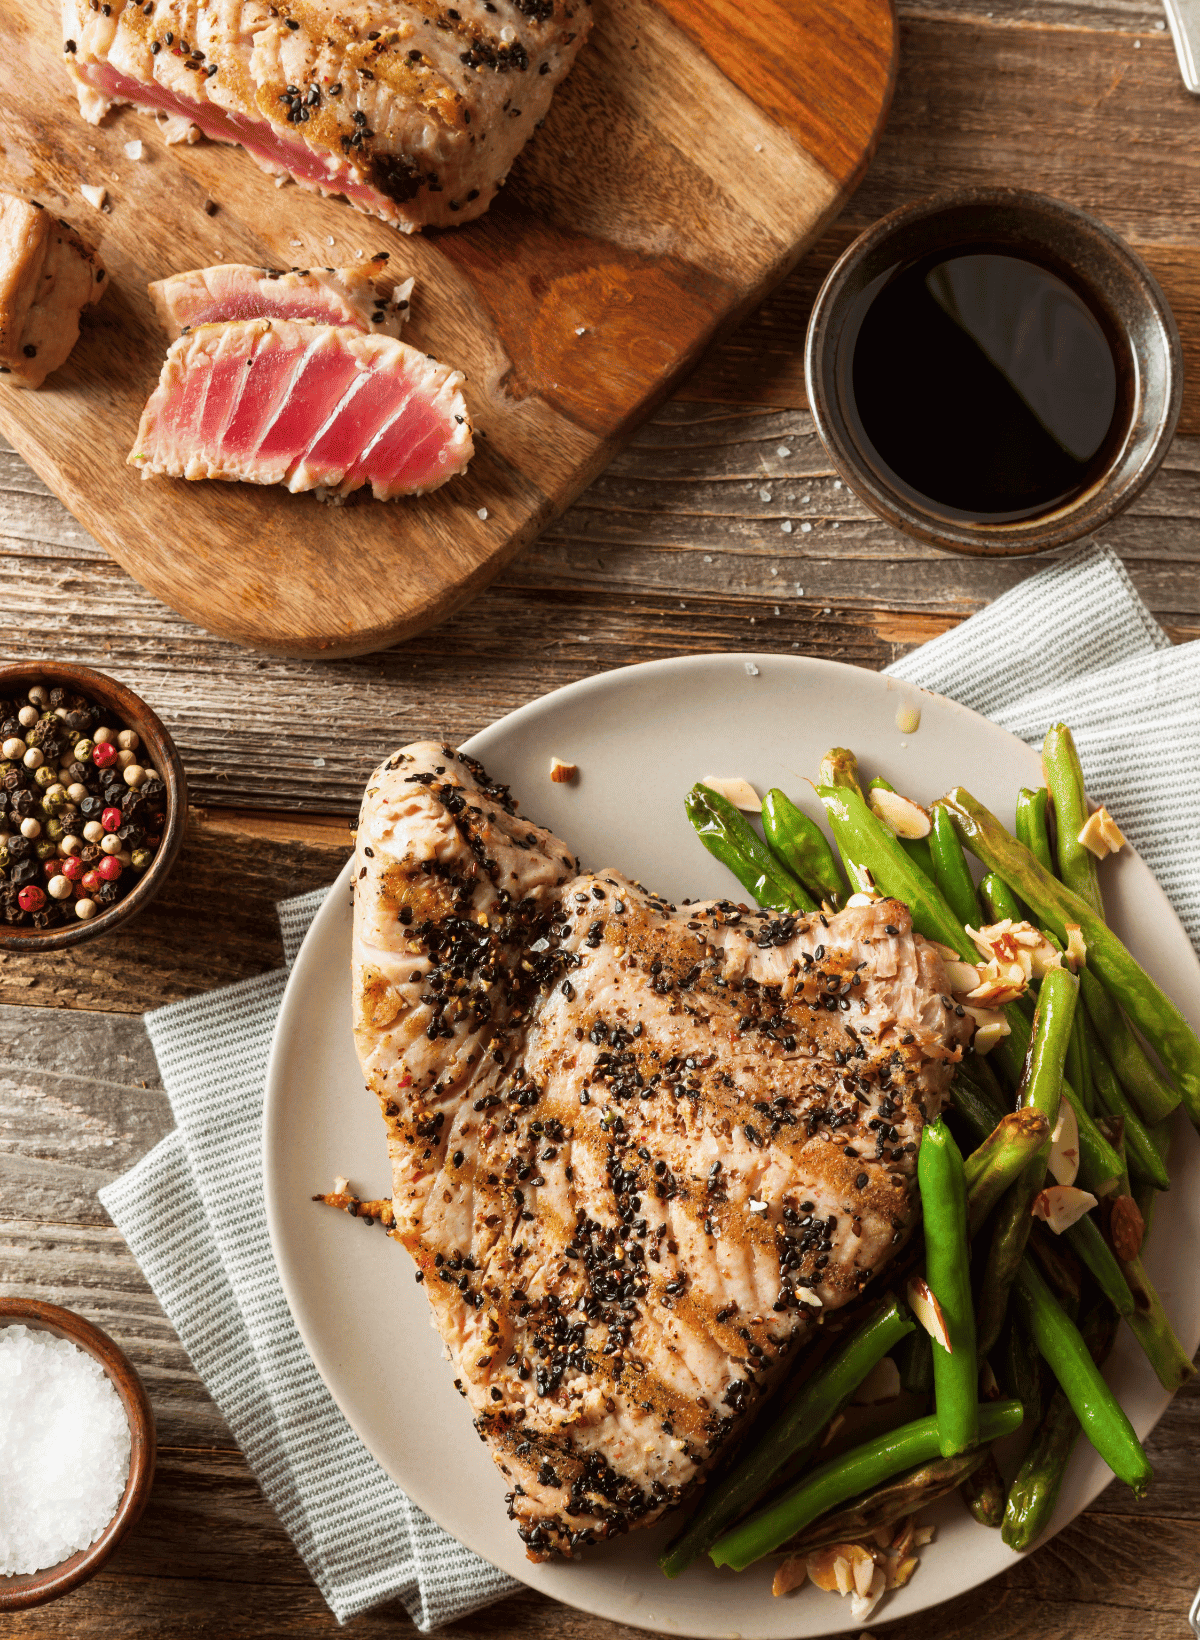 Sliced tuna steak on a wooden cutting board and a large grilled tuna steak on a white plate with green beans